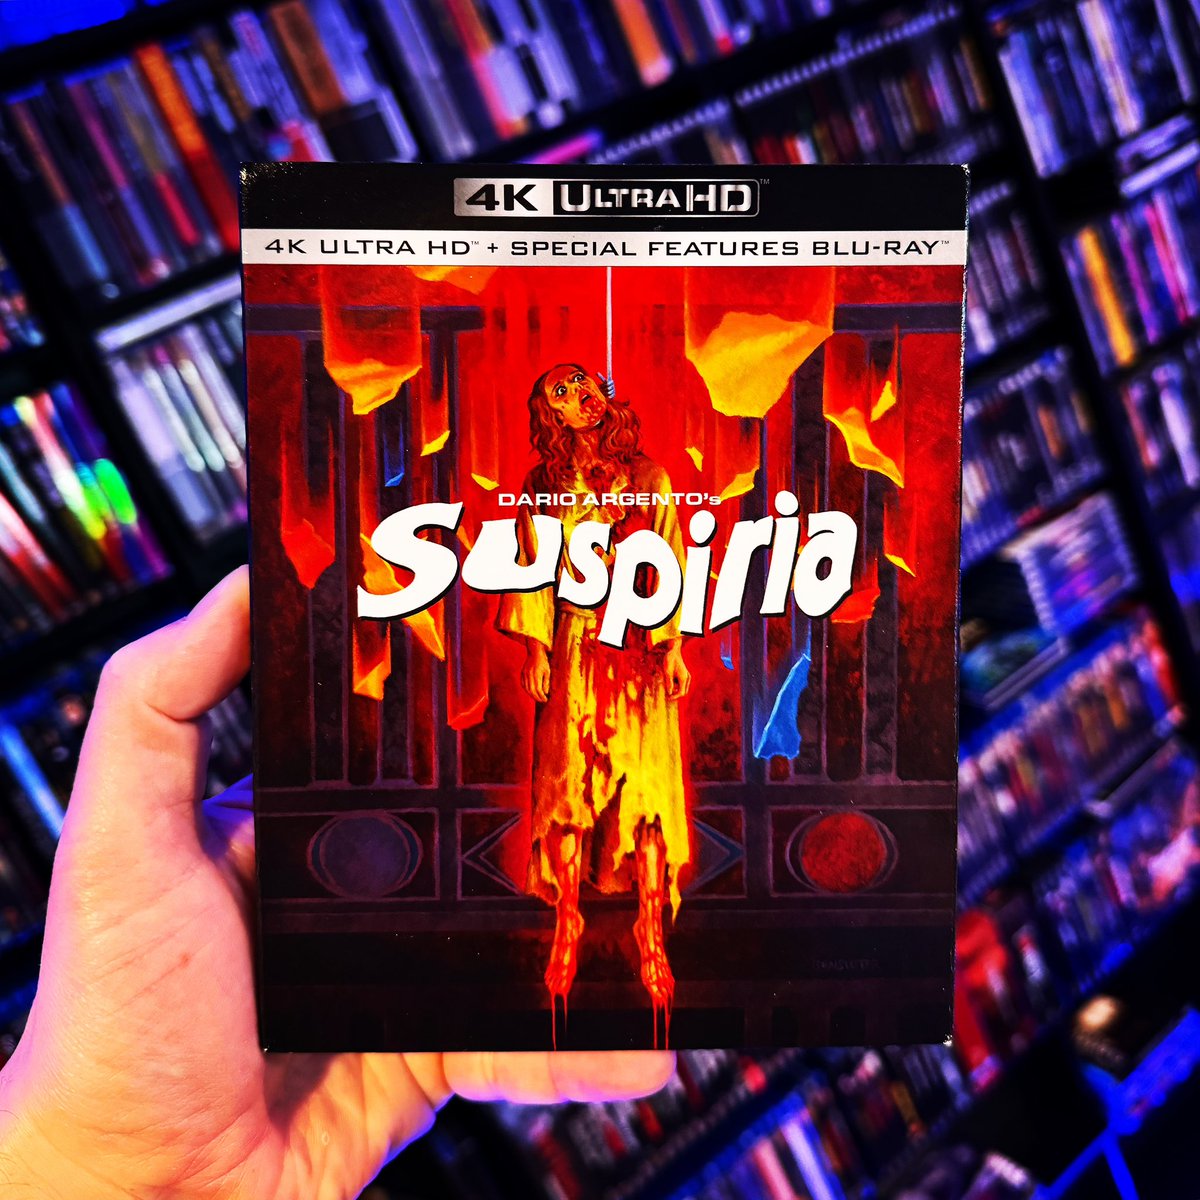 Quite possibly the best 4K disc that I have in the collection! The detail and colors are insane. I’ll be talking about this one very soon on the channel, so definitely stay tuned for that! #suspiria #darioargento #synapsefilms #bluray #4K #horrormovies